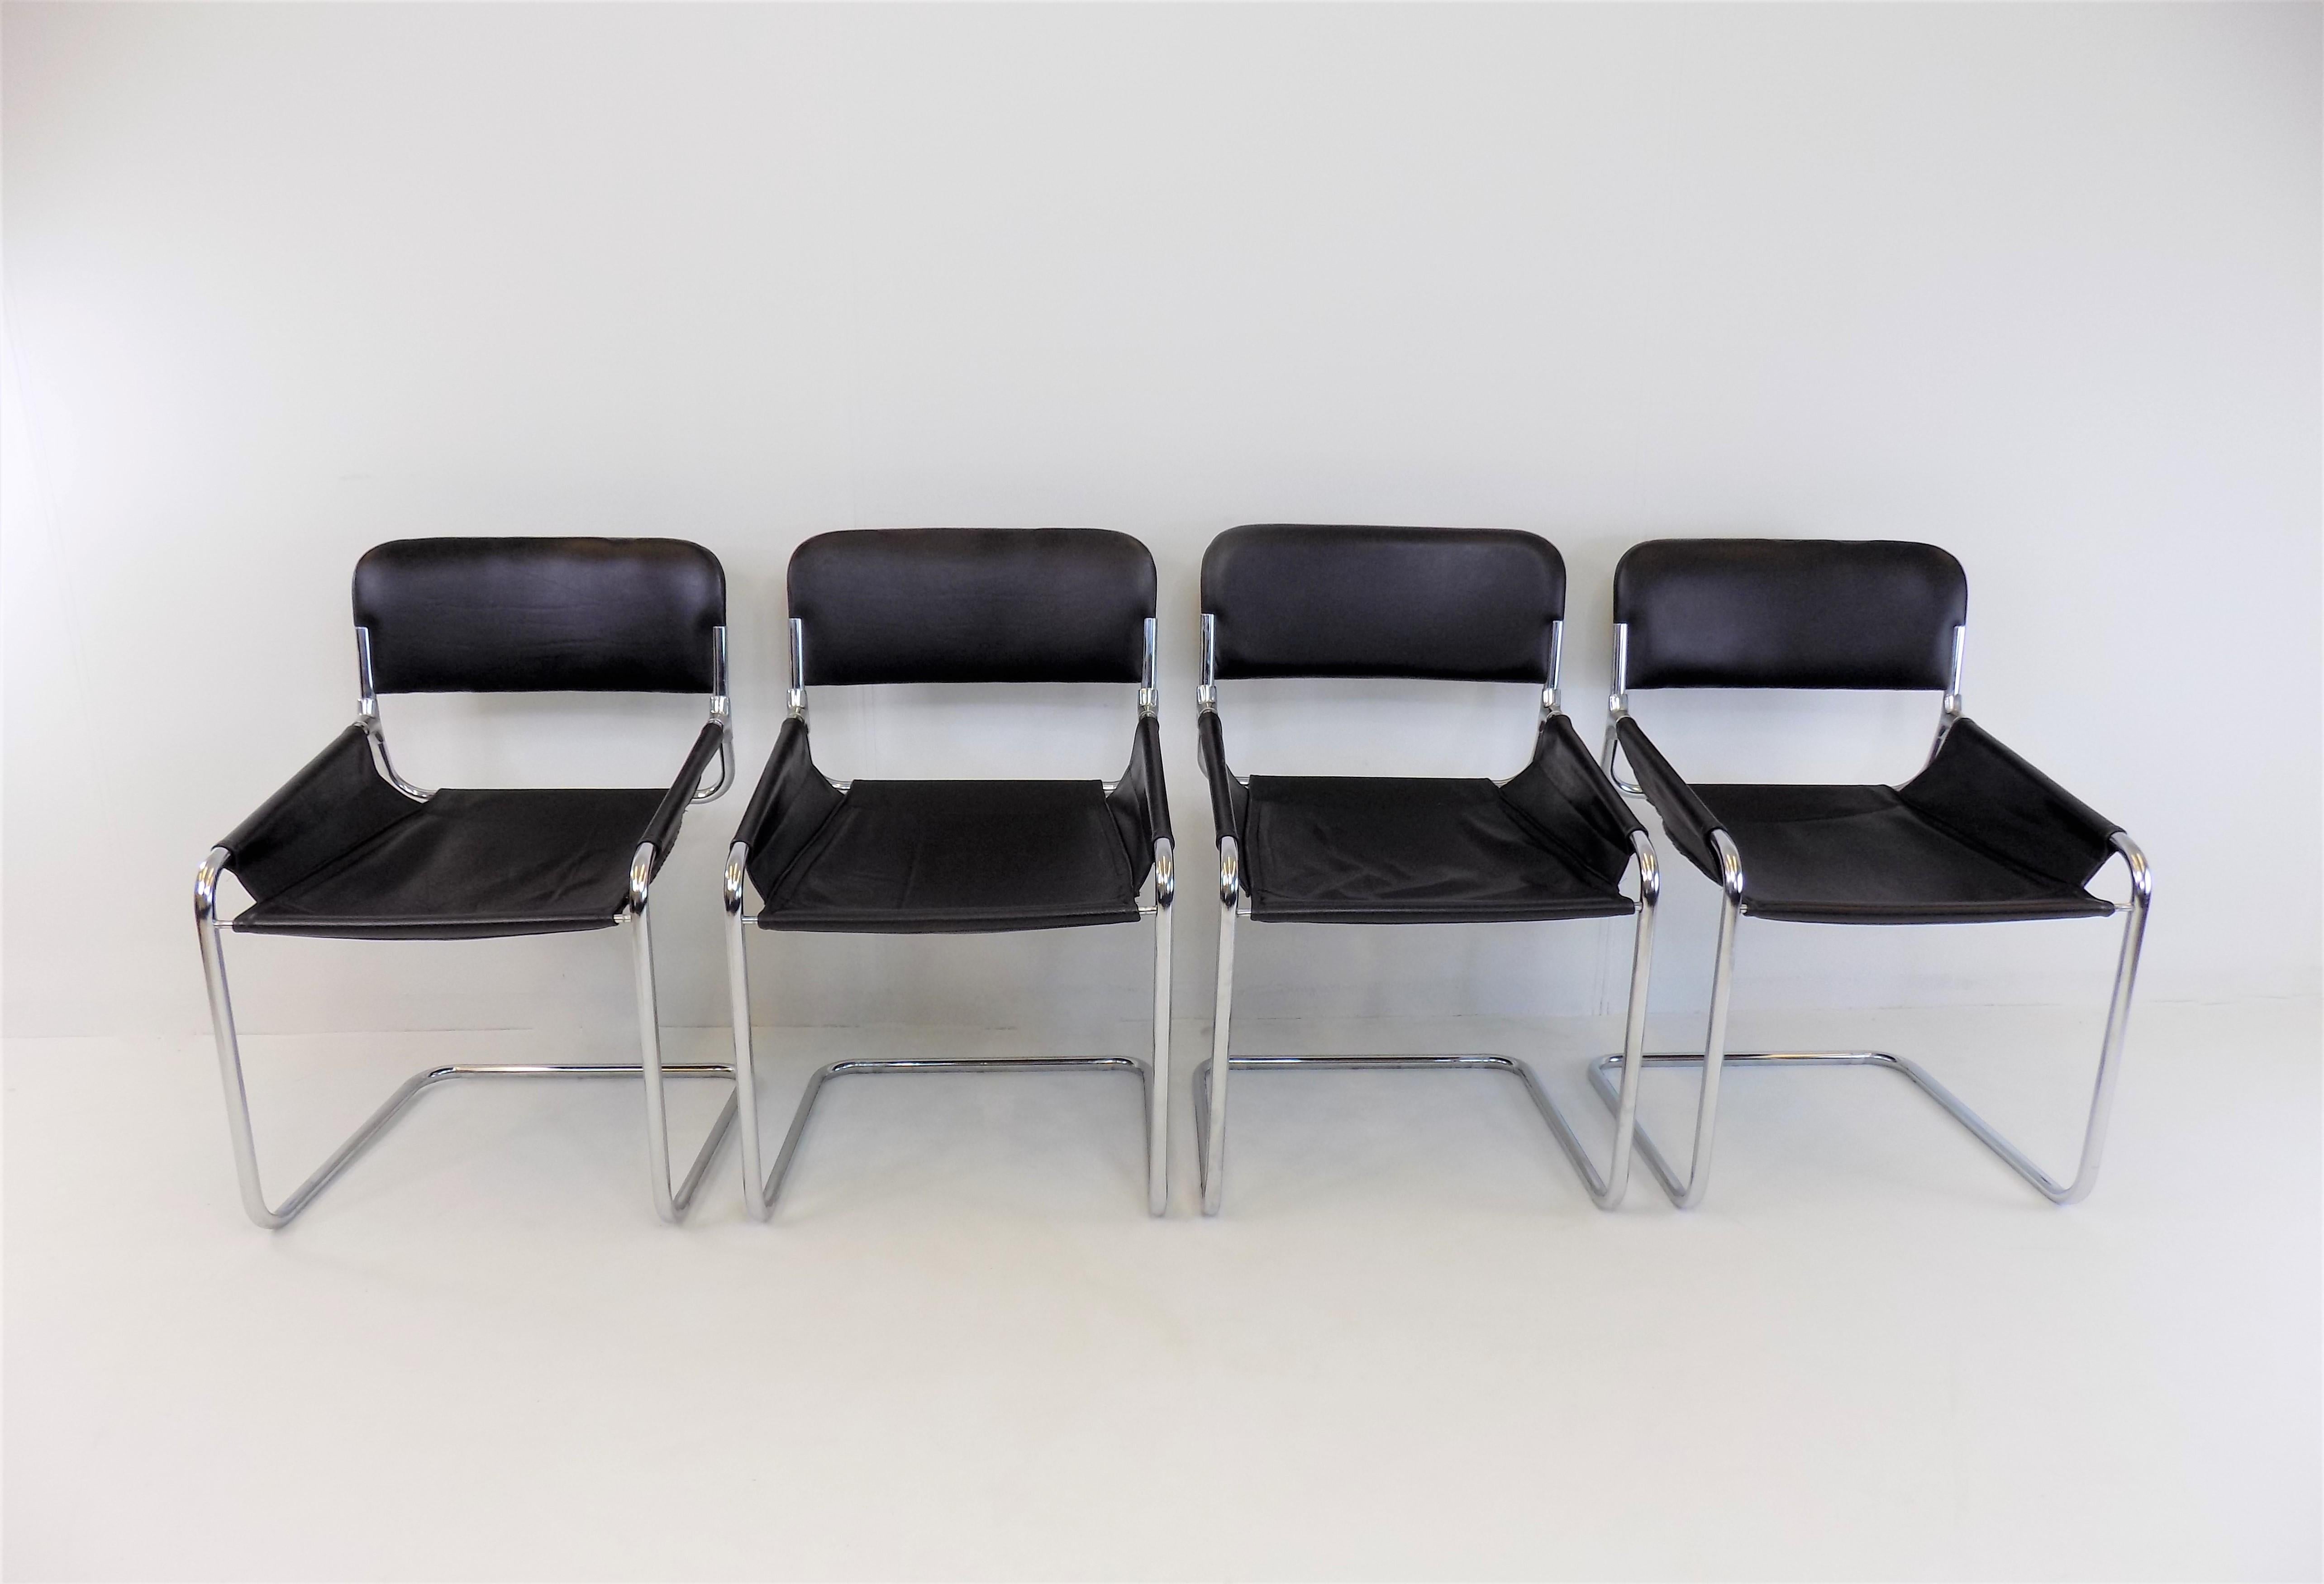 This set of 4 cantilever chairs is in very good condition. The black leather of the chairs is in perfect condition. The chrome frames show minimal signs of wear. The chairs are characterized by the unusual lines of the seat and the chrome frame,